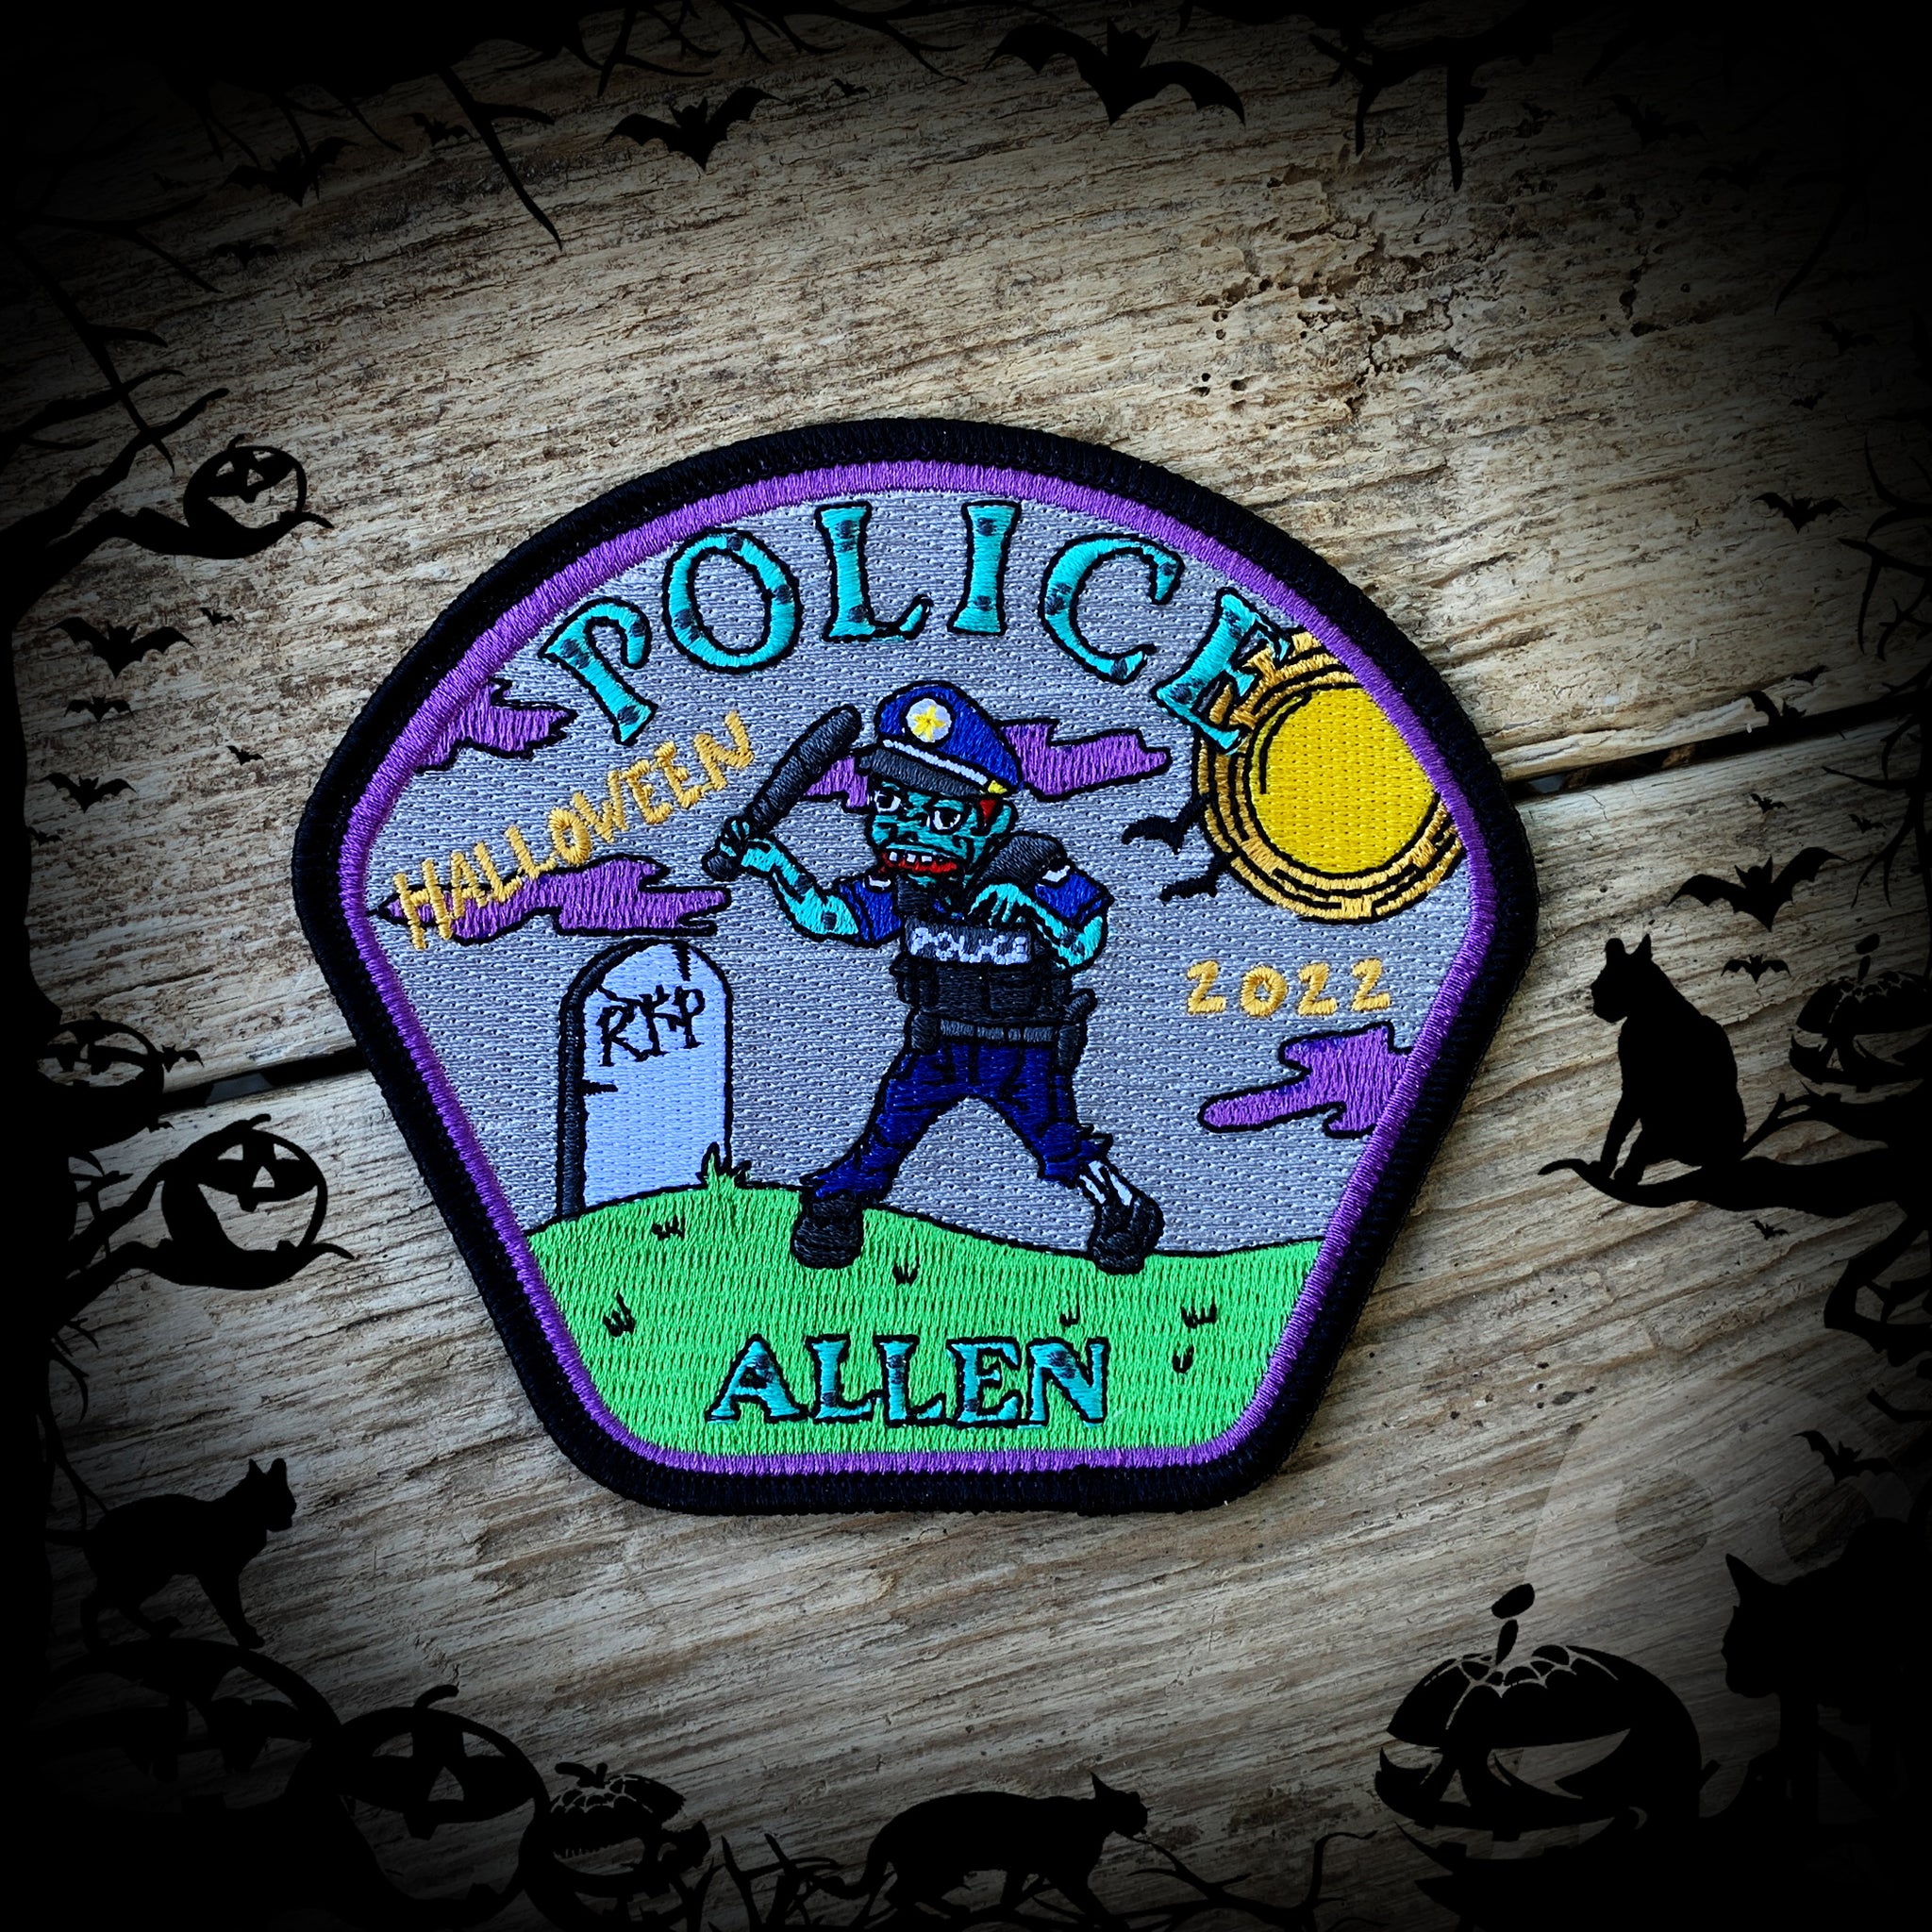 Allen, TX PD 2022 Halloween Patch - Authentic and limited!